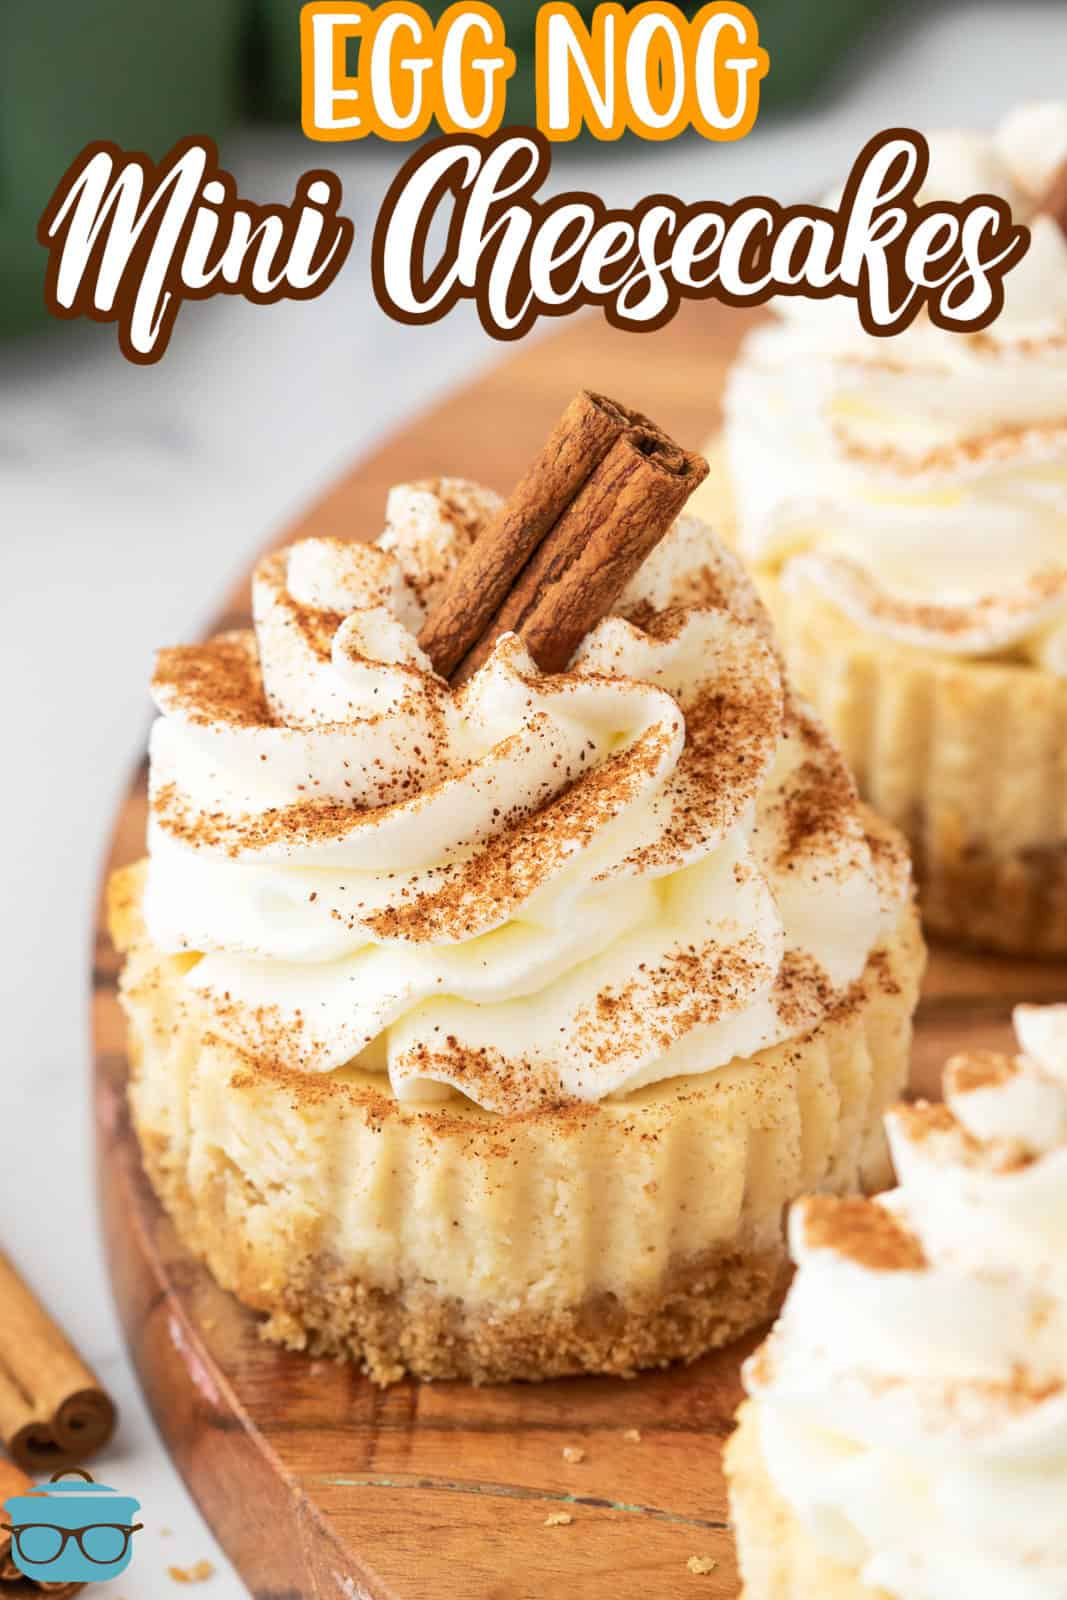 Pinterest image of Egg Nog Mini Cheesecakes on wooden board topped with garnishes.